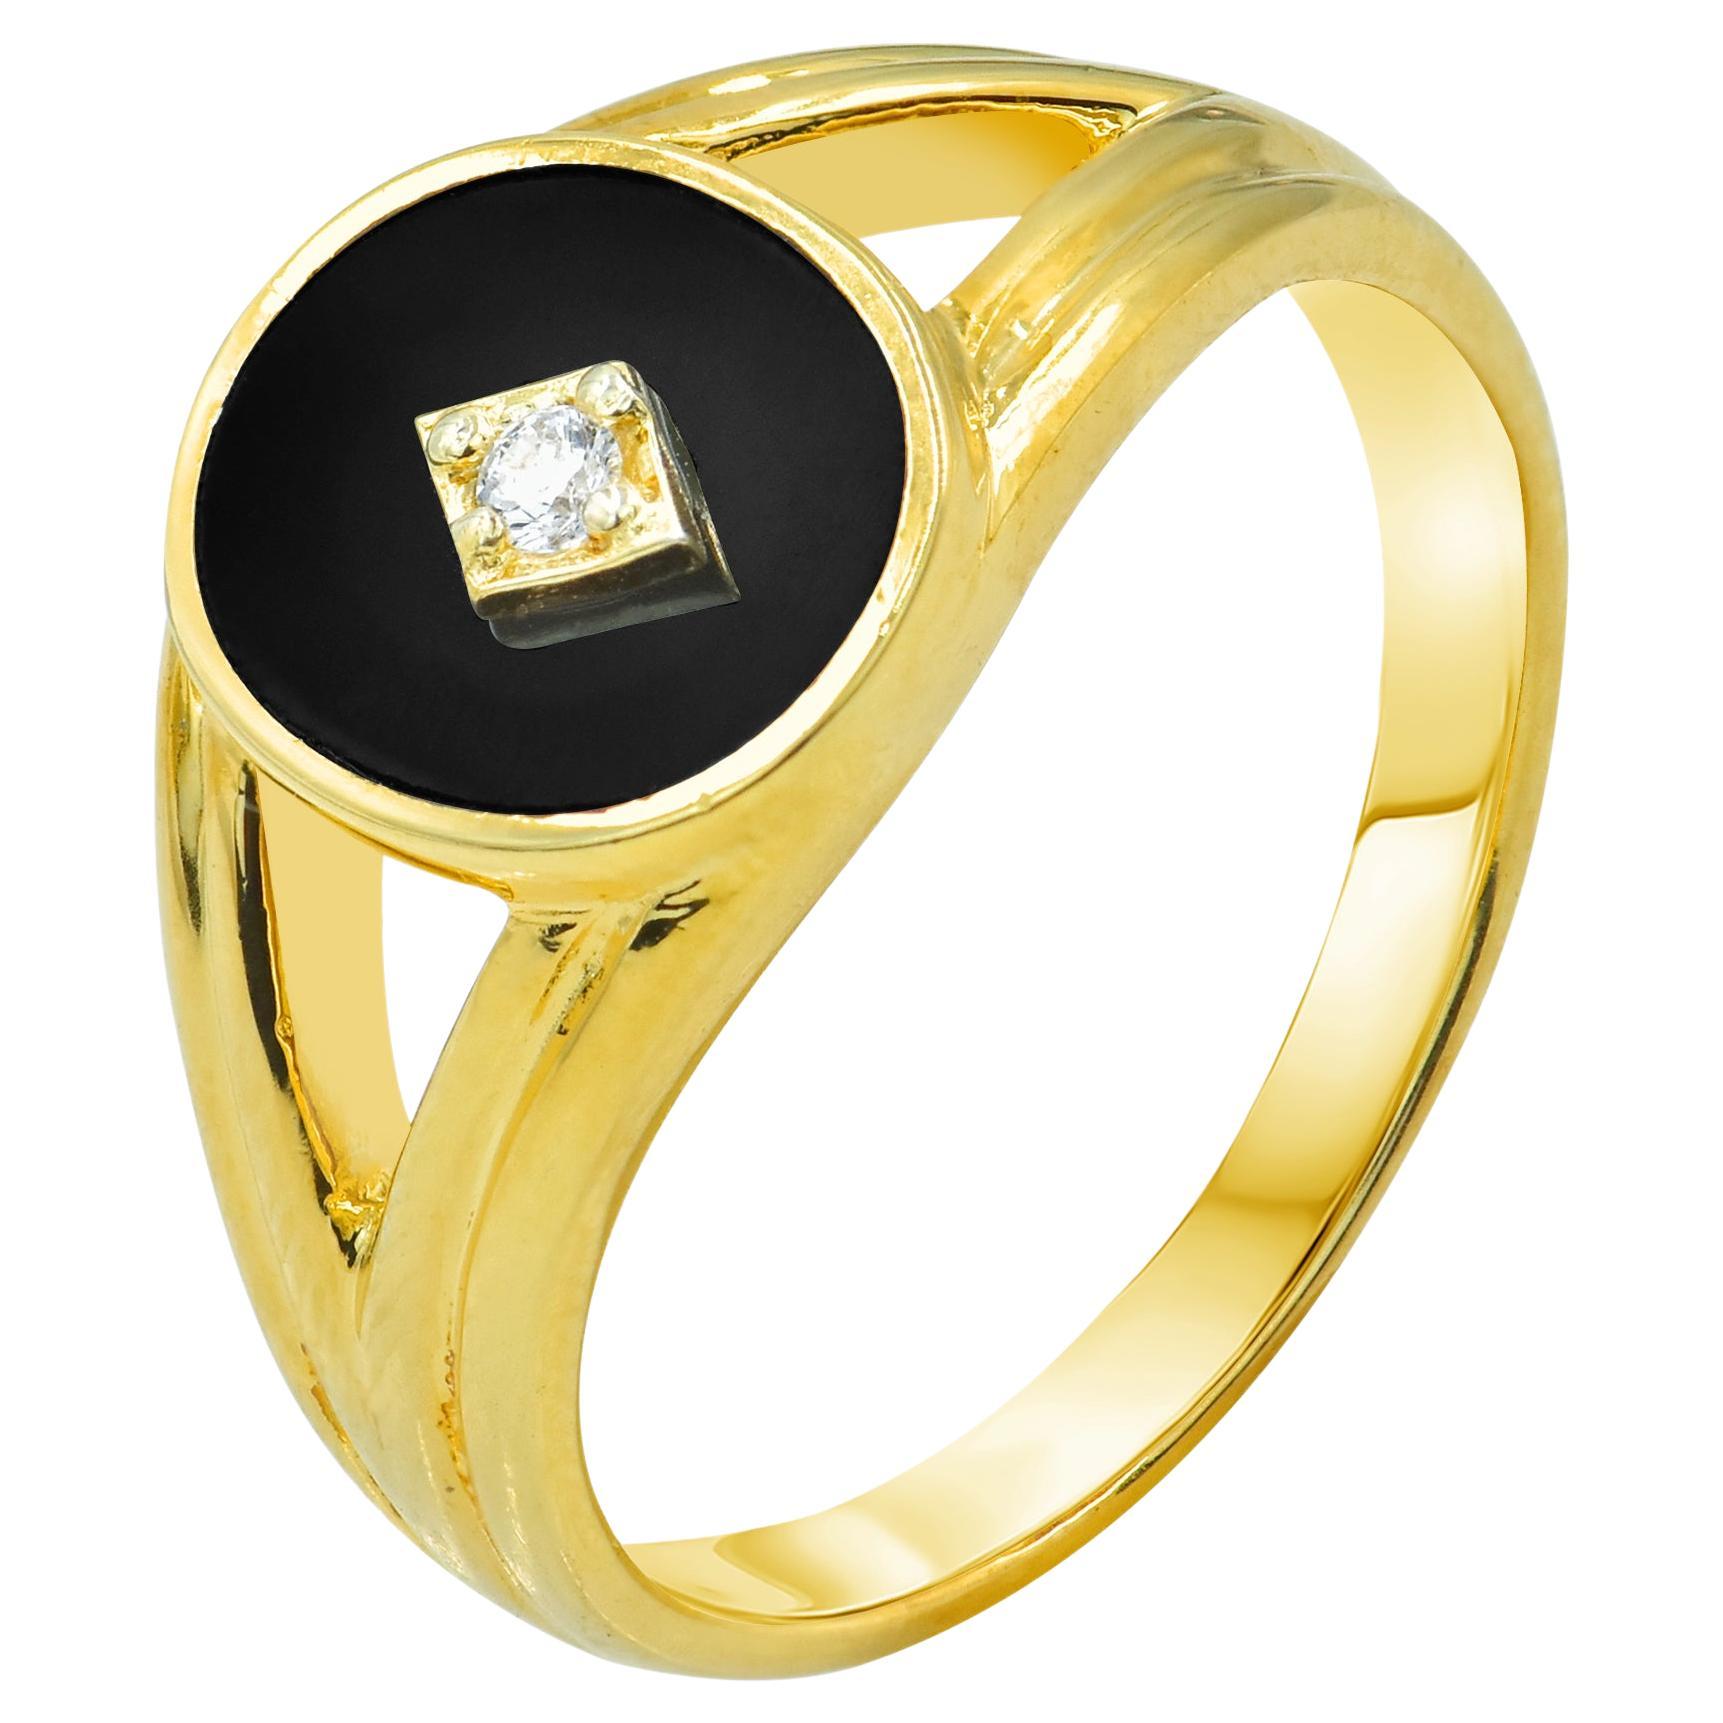 18K Gold filled Signet ring with Black onyx and 0.03 Carat Natural Diamond